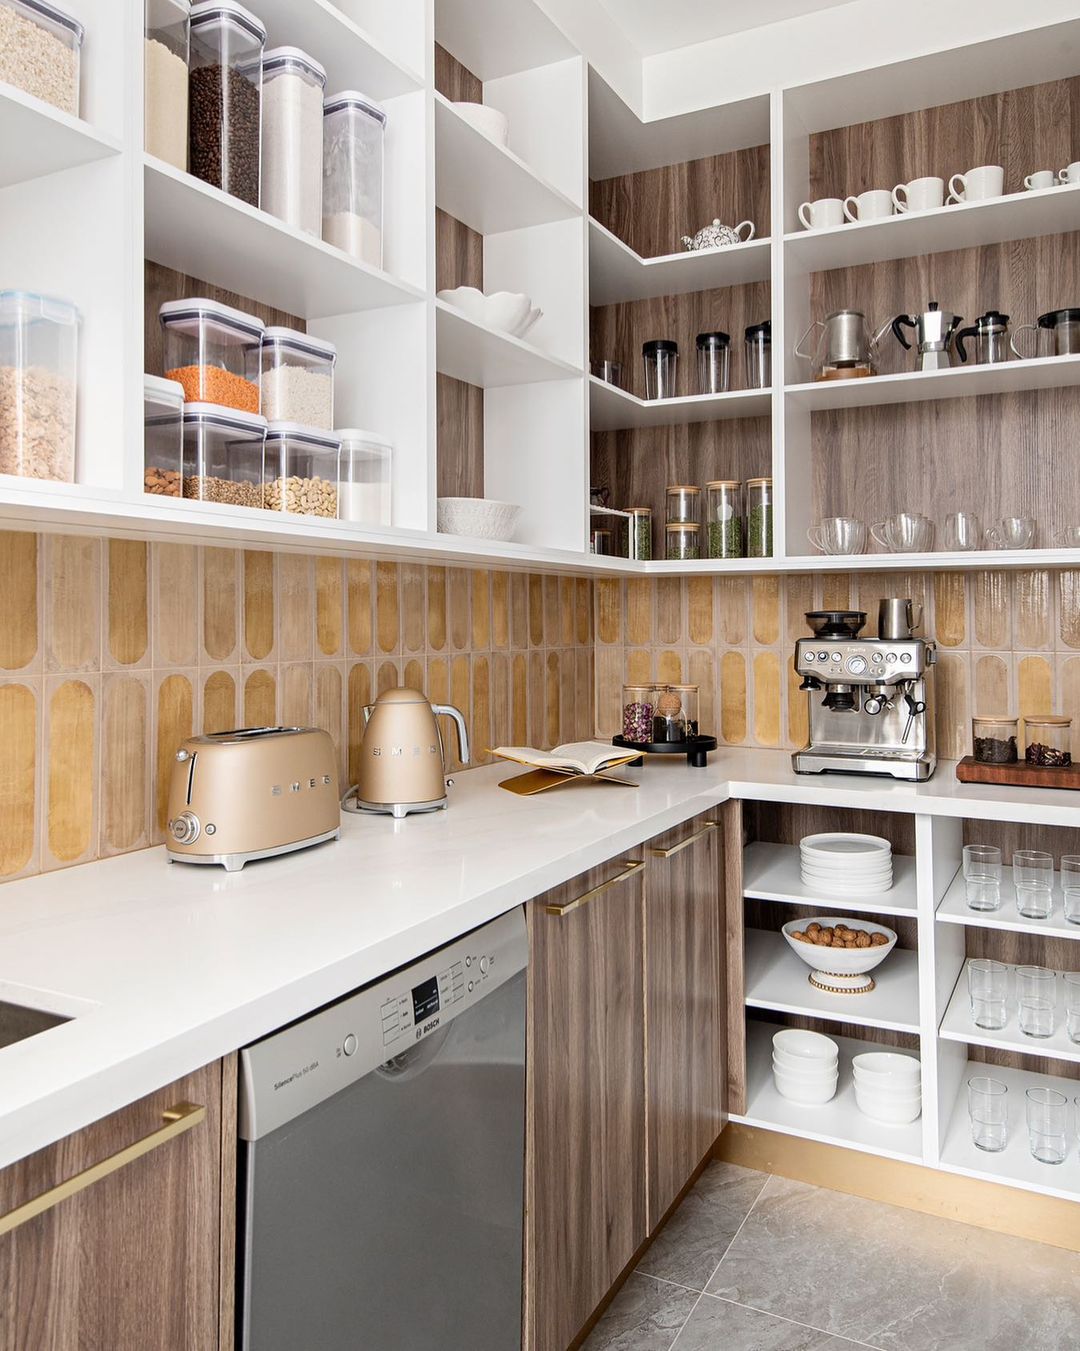 Retro Vibes with Gold-Accented Backsplash in a Modern Pantry